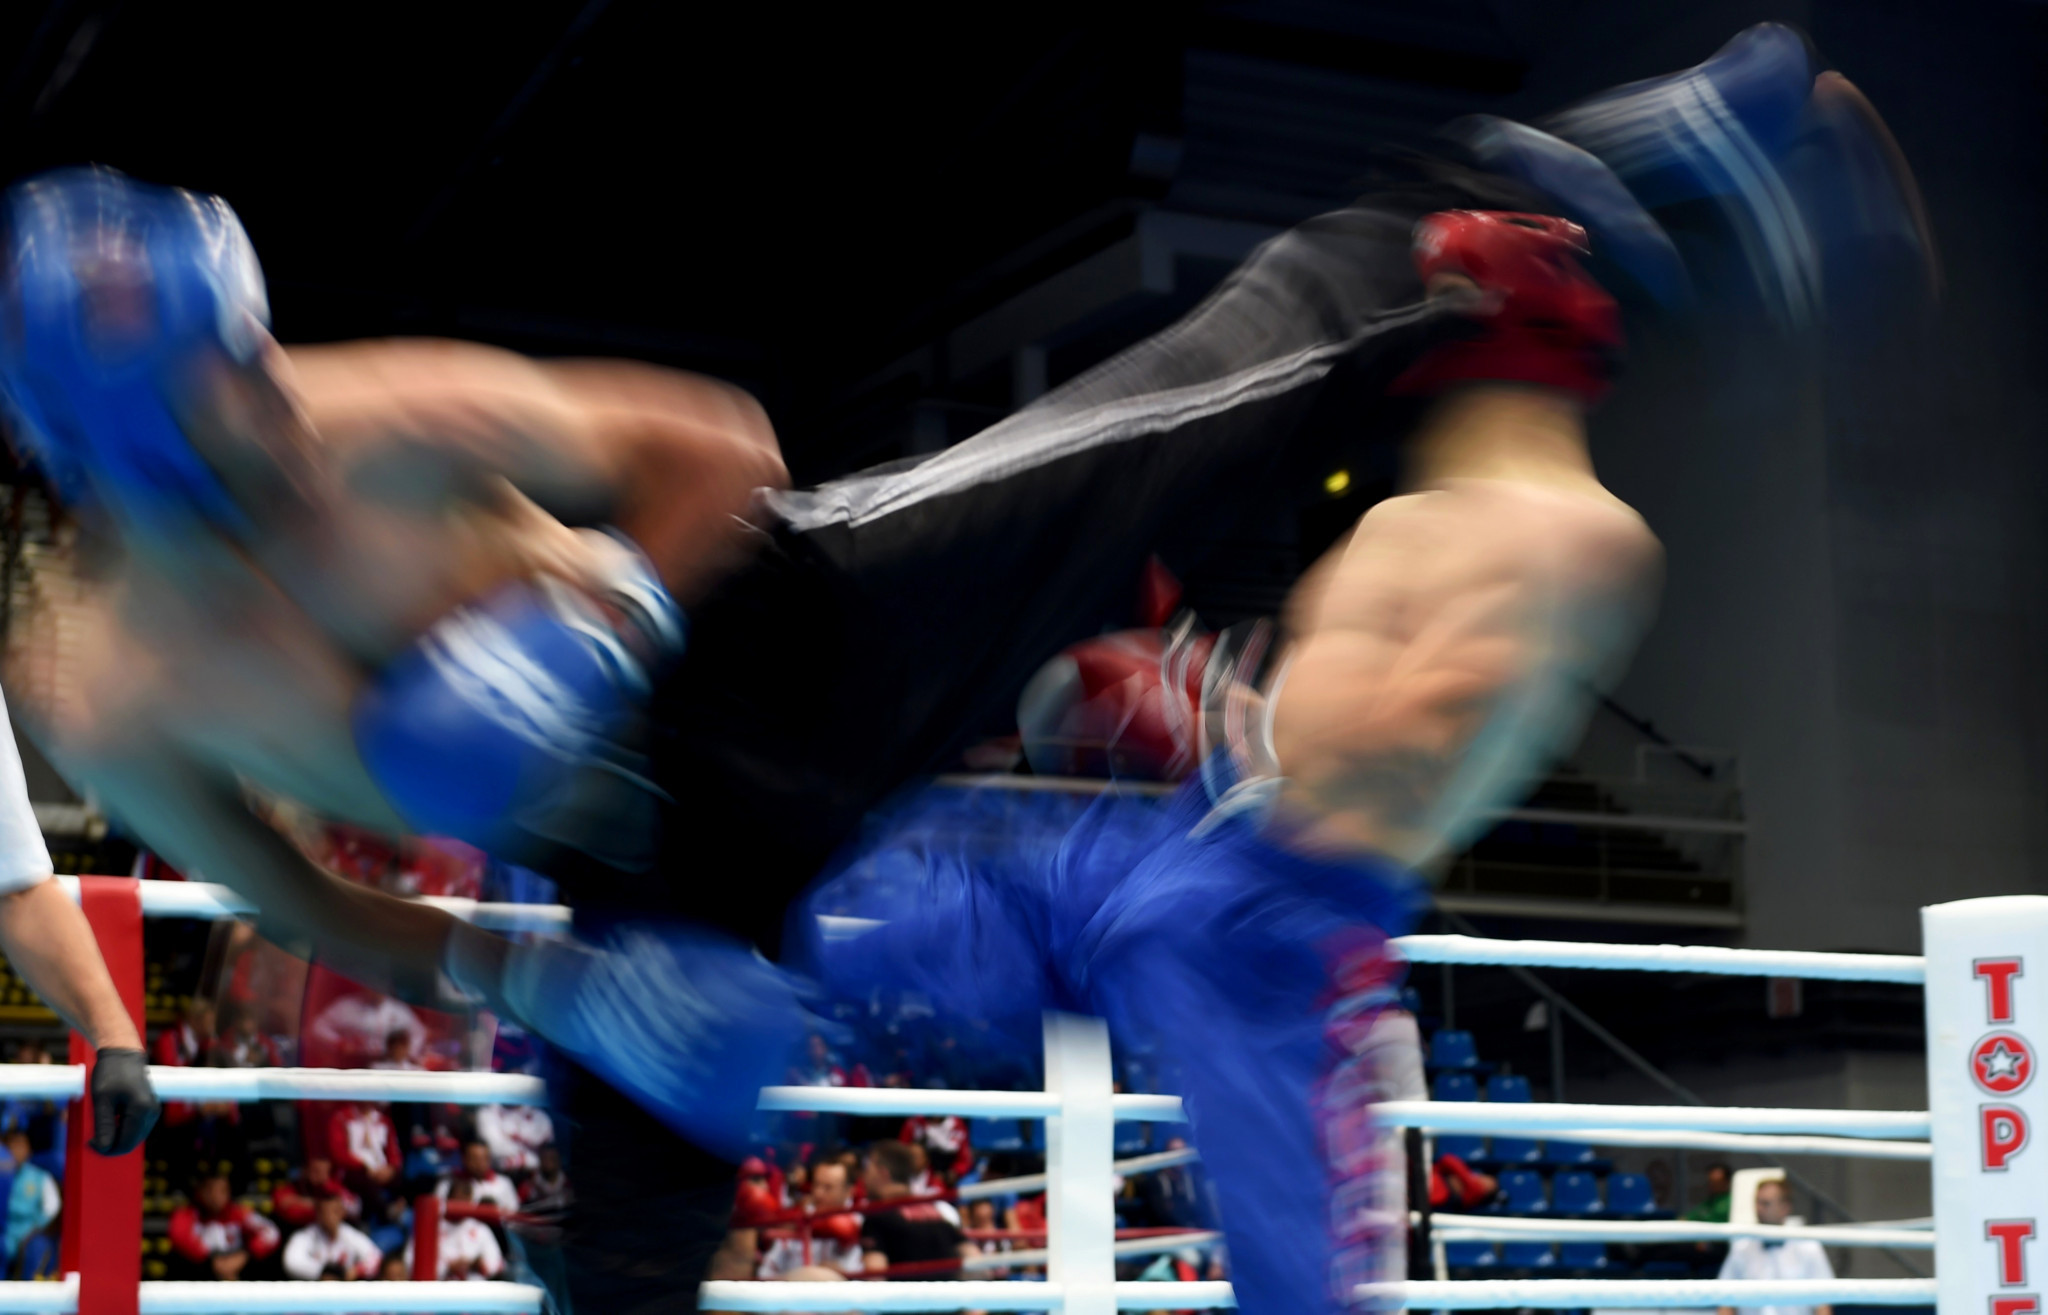 Exclusive: WAKO President says kickboxing "destined" to appear at Olympics after LA 2028 blow